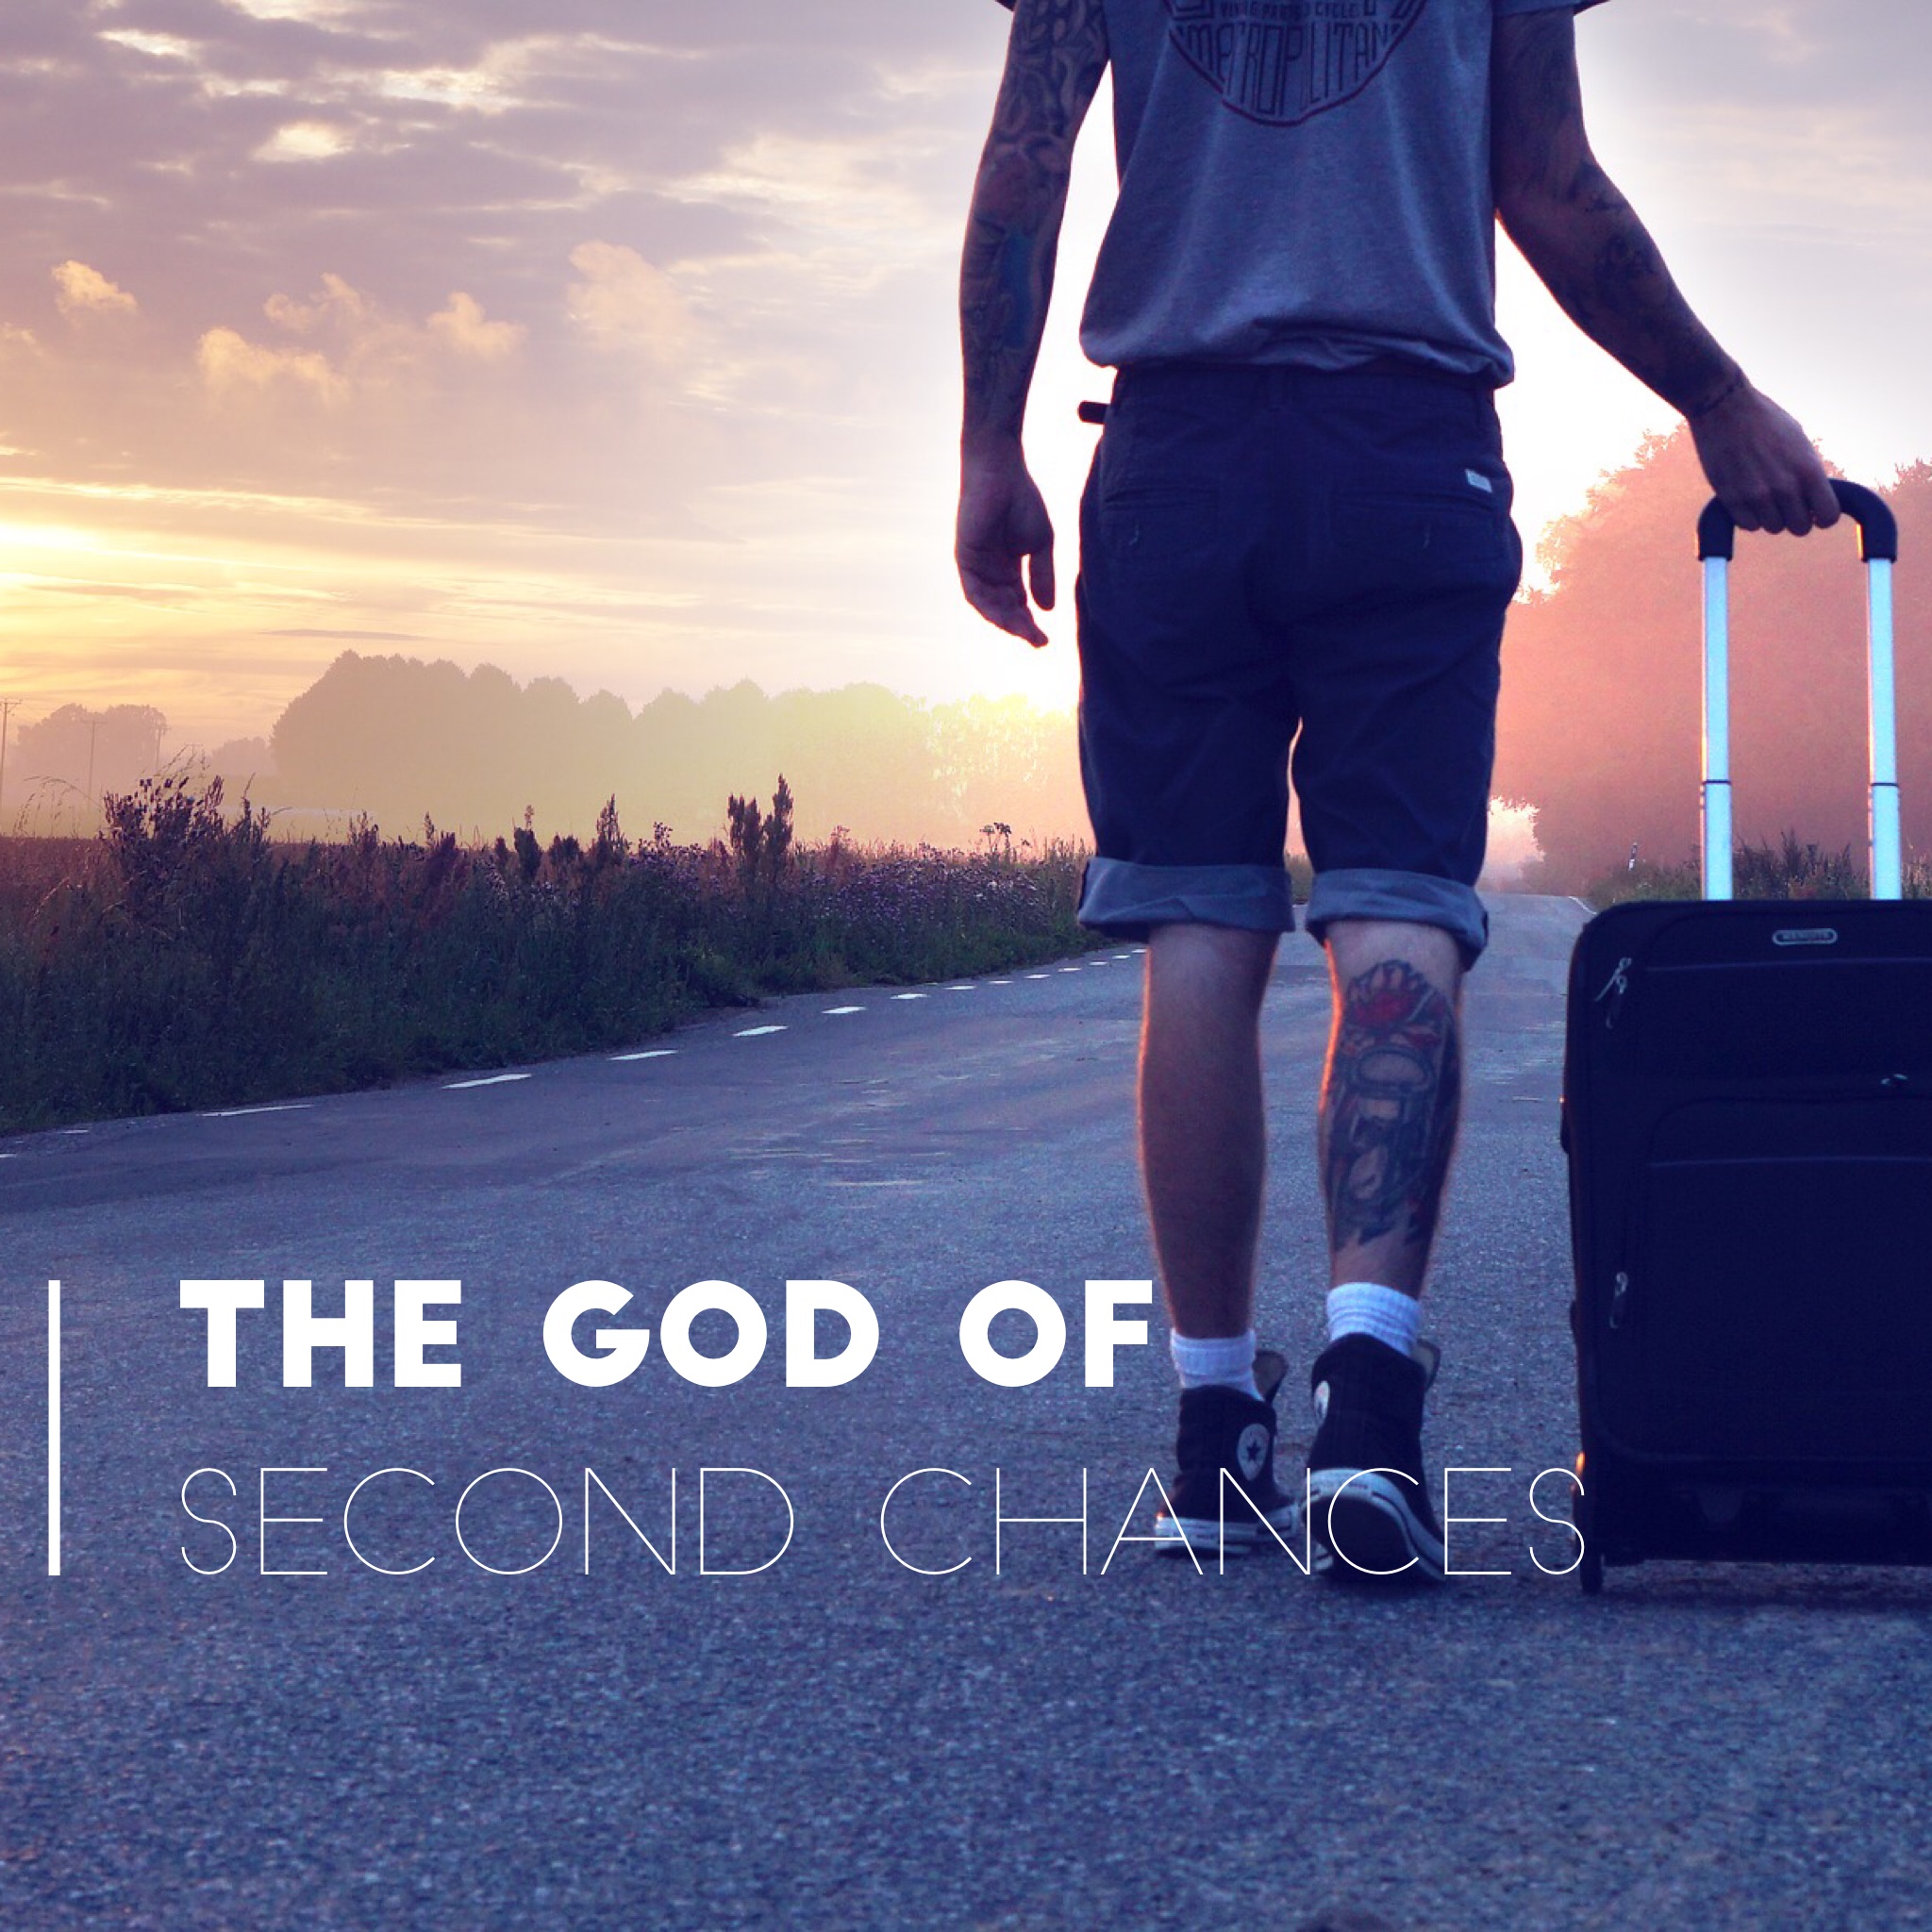 The God of Second Chances